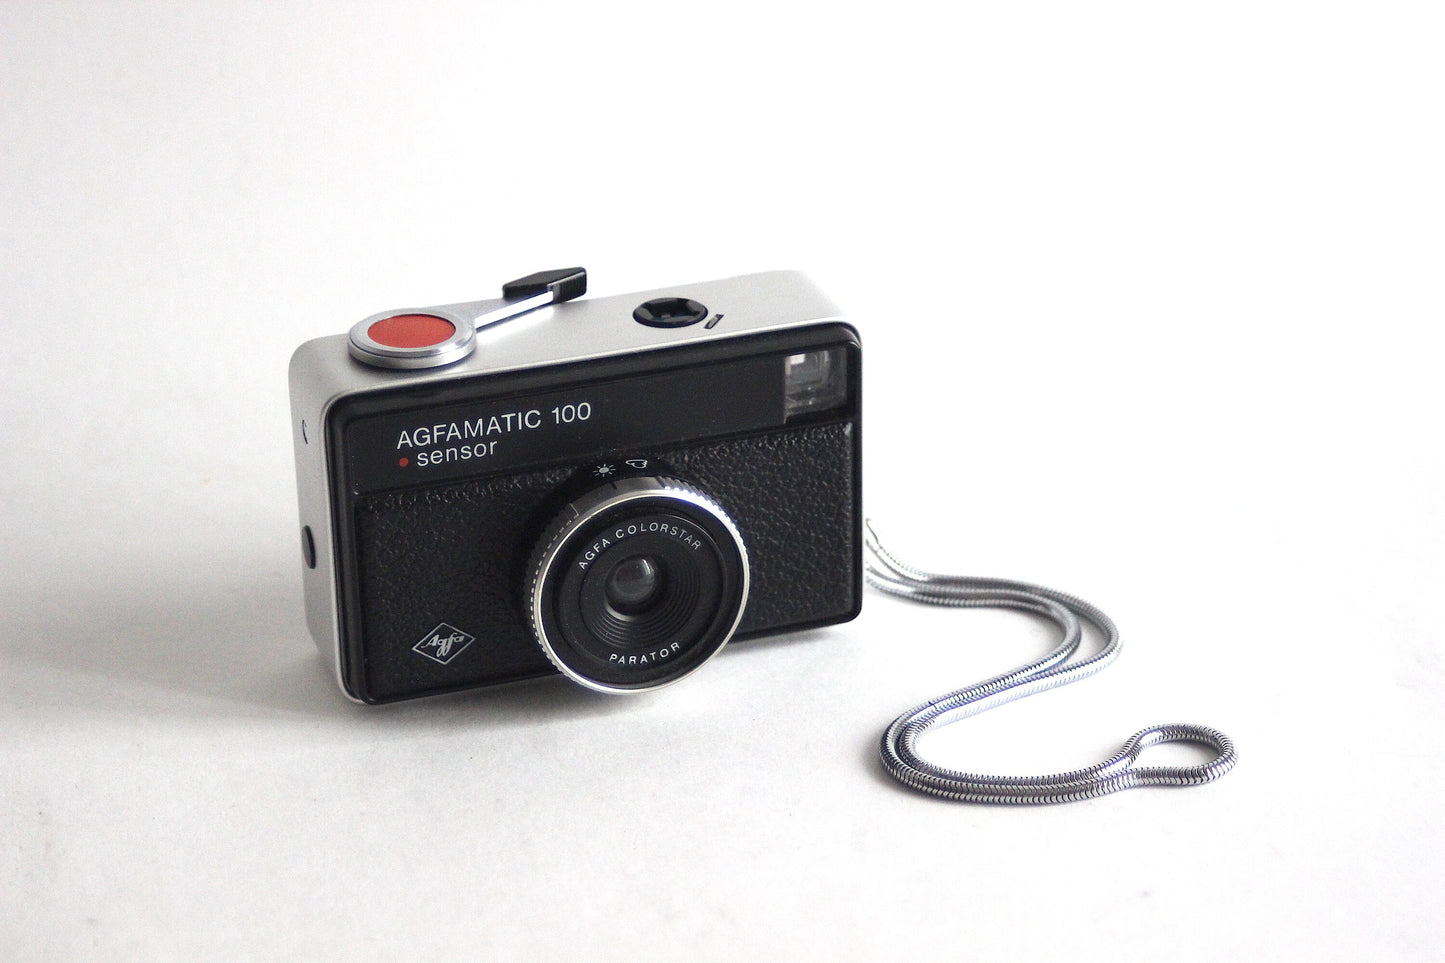 Limited edition AGFA Agfamatic Sensor 100 AIGNER edition with leather case.